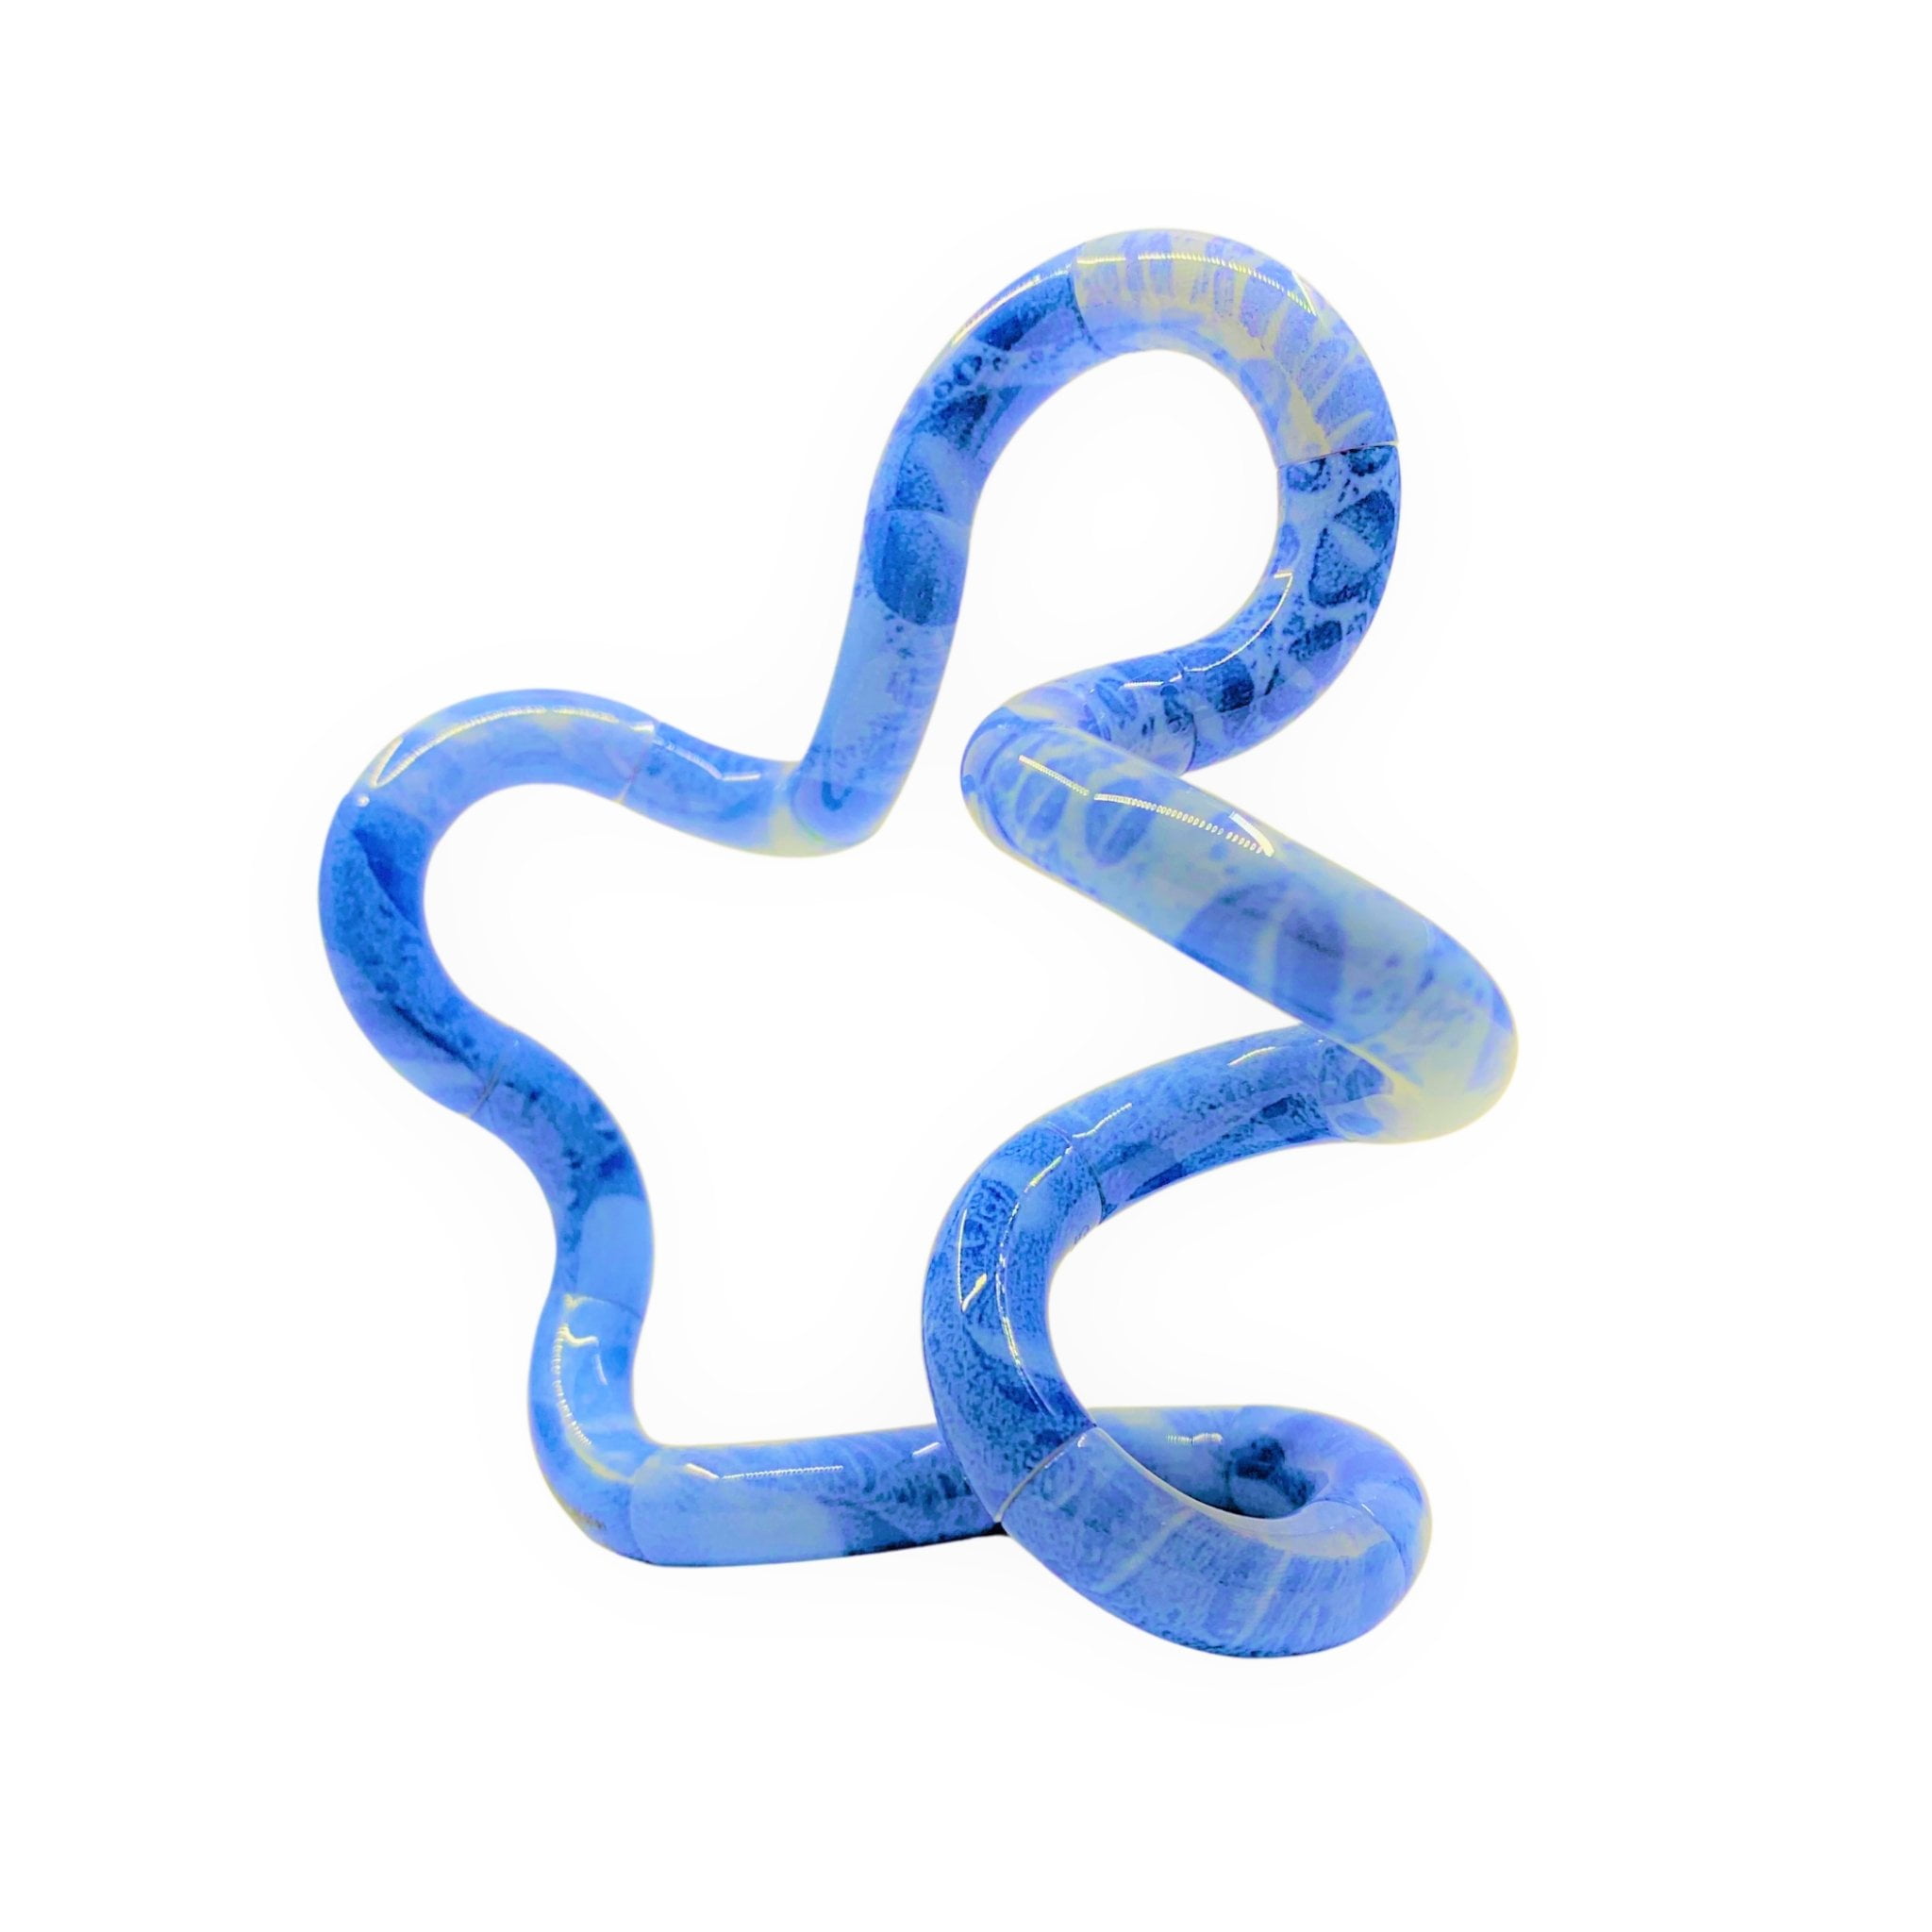 3 Pcs Adult Kids Curved Fidget Twist Tangle Toy String Smooth Relax Anxiety 